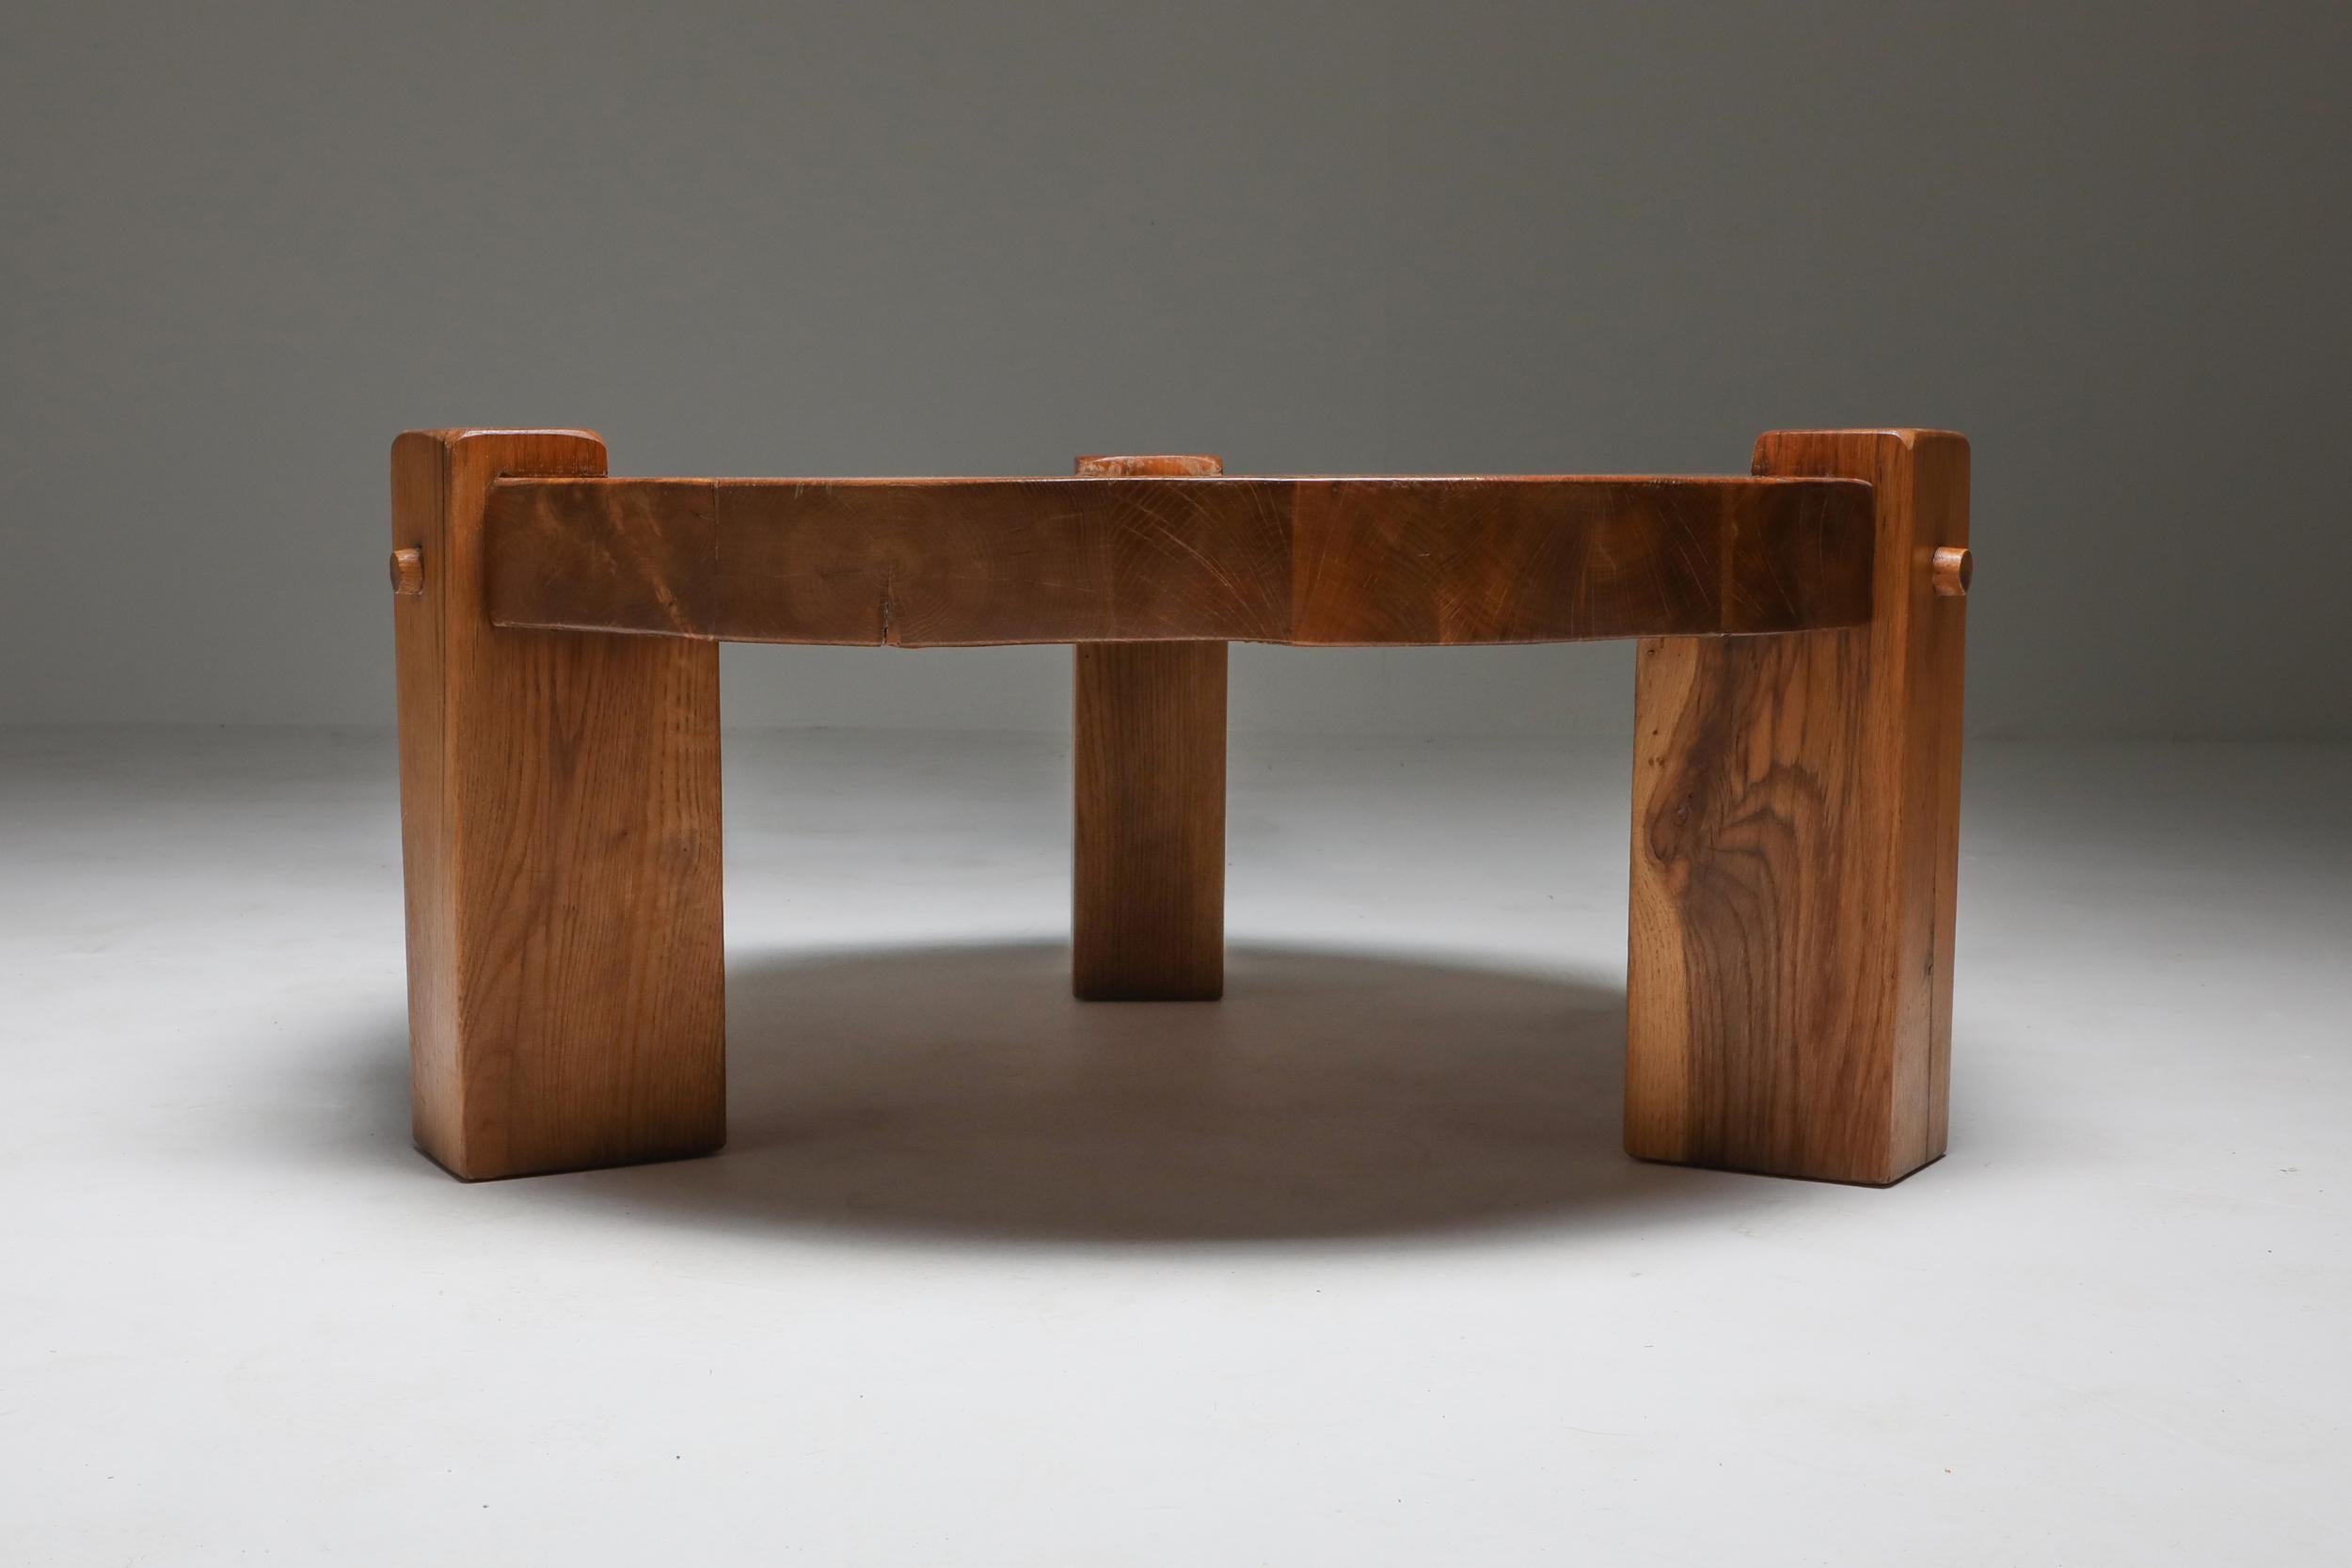 Naturalist wabi sabi artisan piece in solid oak.
A thick top on four legs, made in Europe, the 1960s. 
Would fit well in an Axel Vervoordt inspired interior. 
Integrates Brutalist and wabi-sabi qualities in your decor.

  